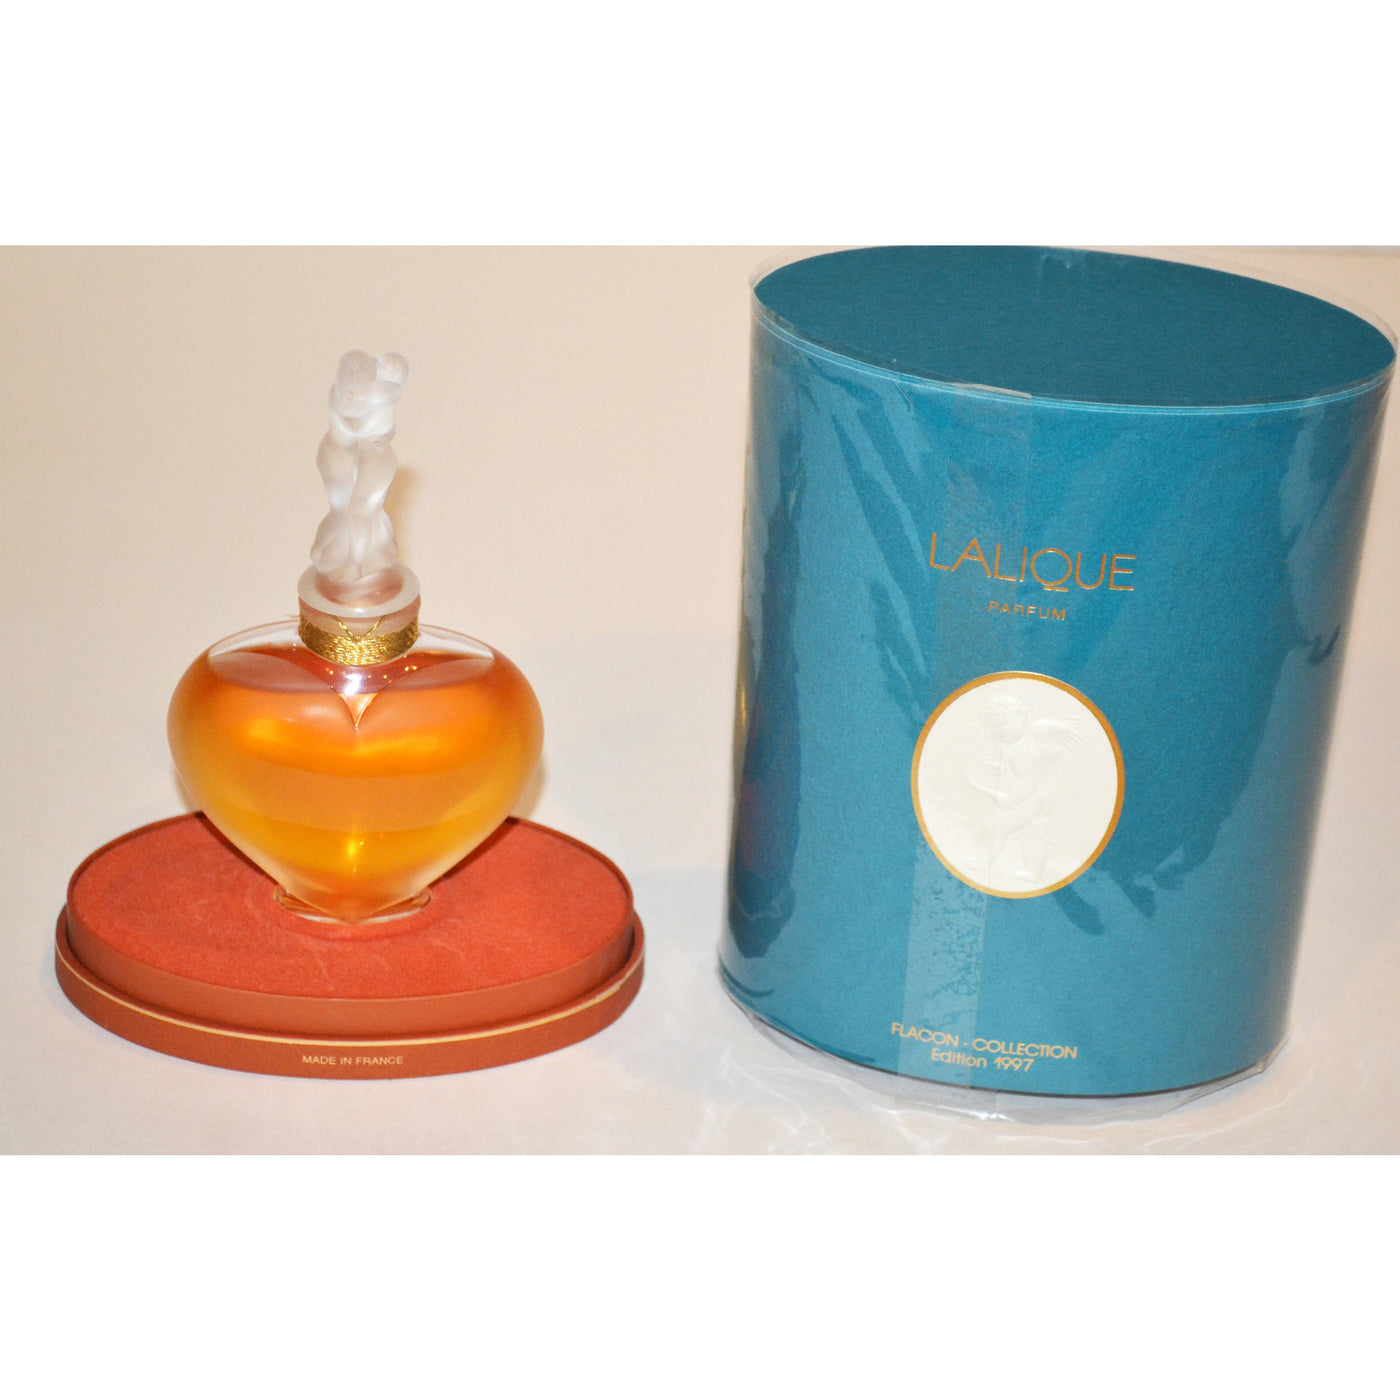 Amour Parfum 1997 Limited Edition Flacon By Lalique